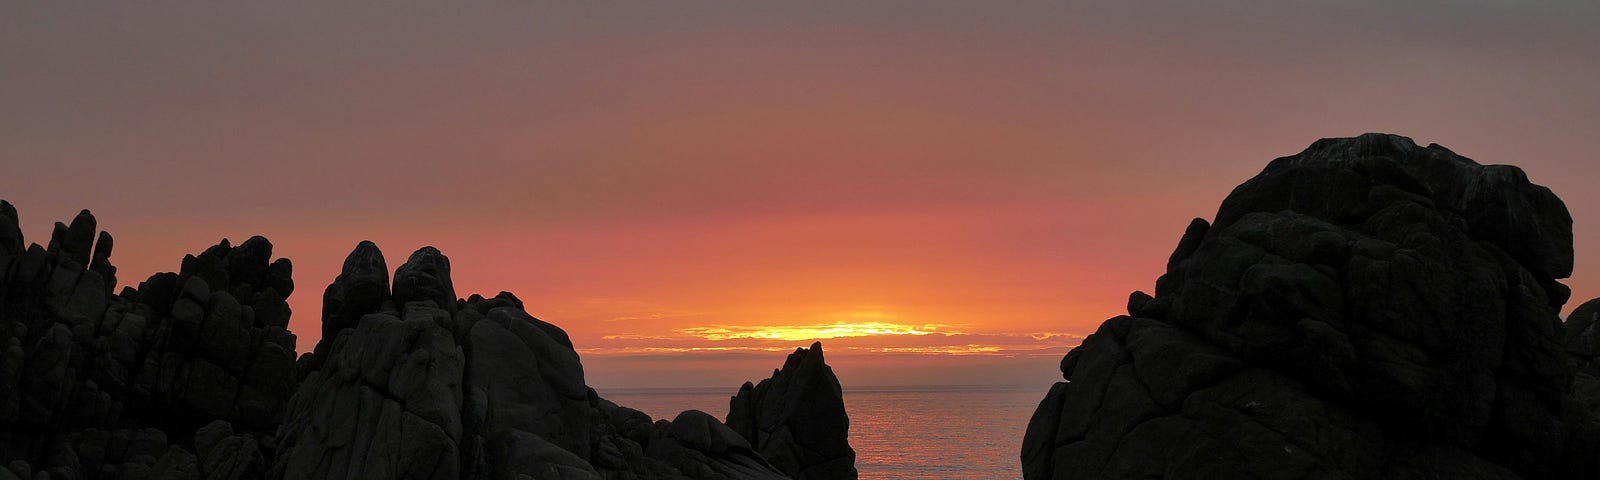 A craggy landscape almost silhouetted as the sun sets over the sea